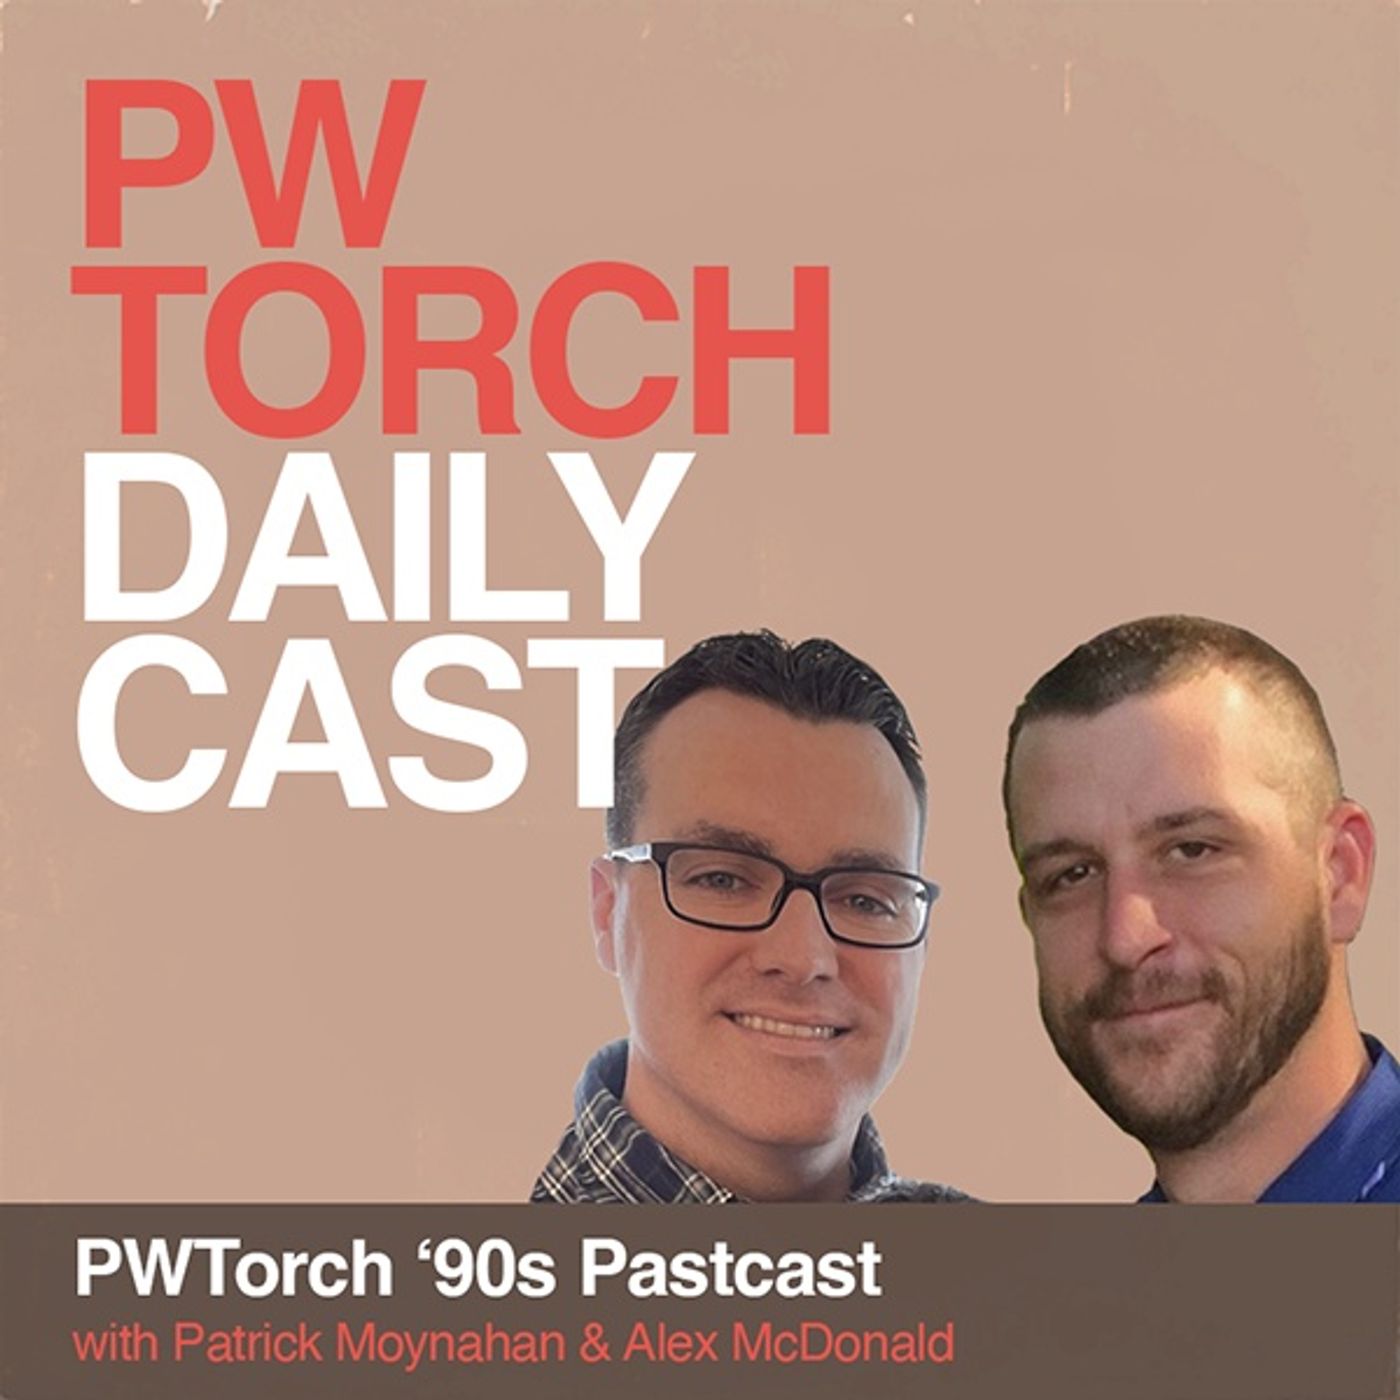 PWTorch ‘90s Pastcast - Moynahan & McDonald discuss issue #263 (1-22-94) of the PWTorch including Heenan joining WCW, MSG Rumble, more